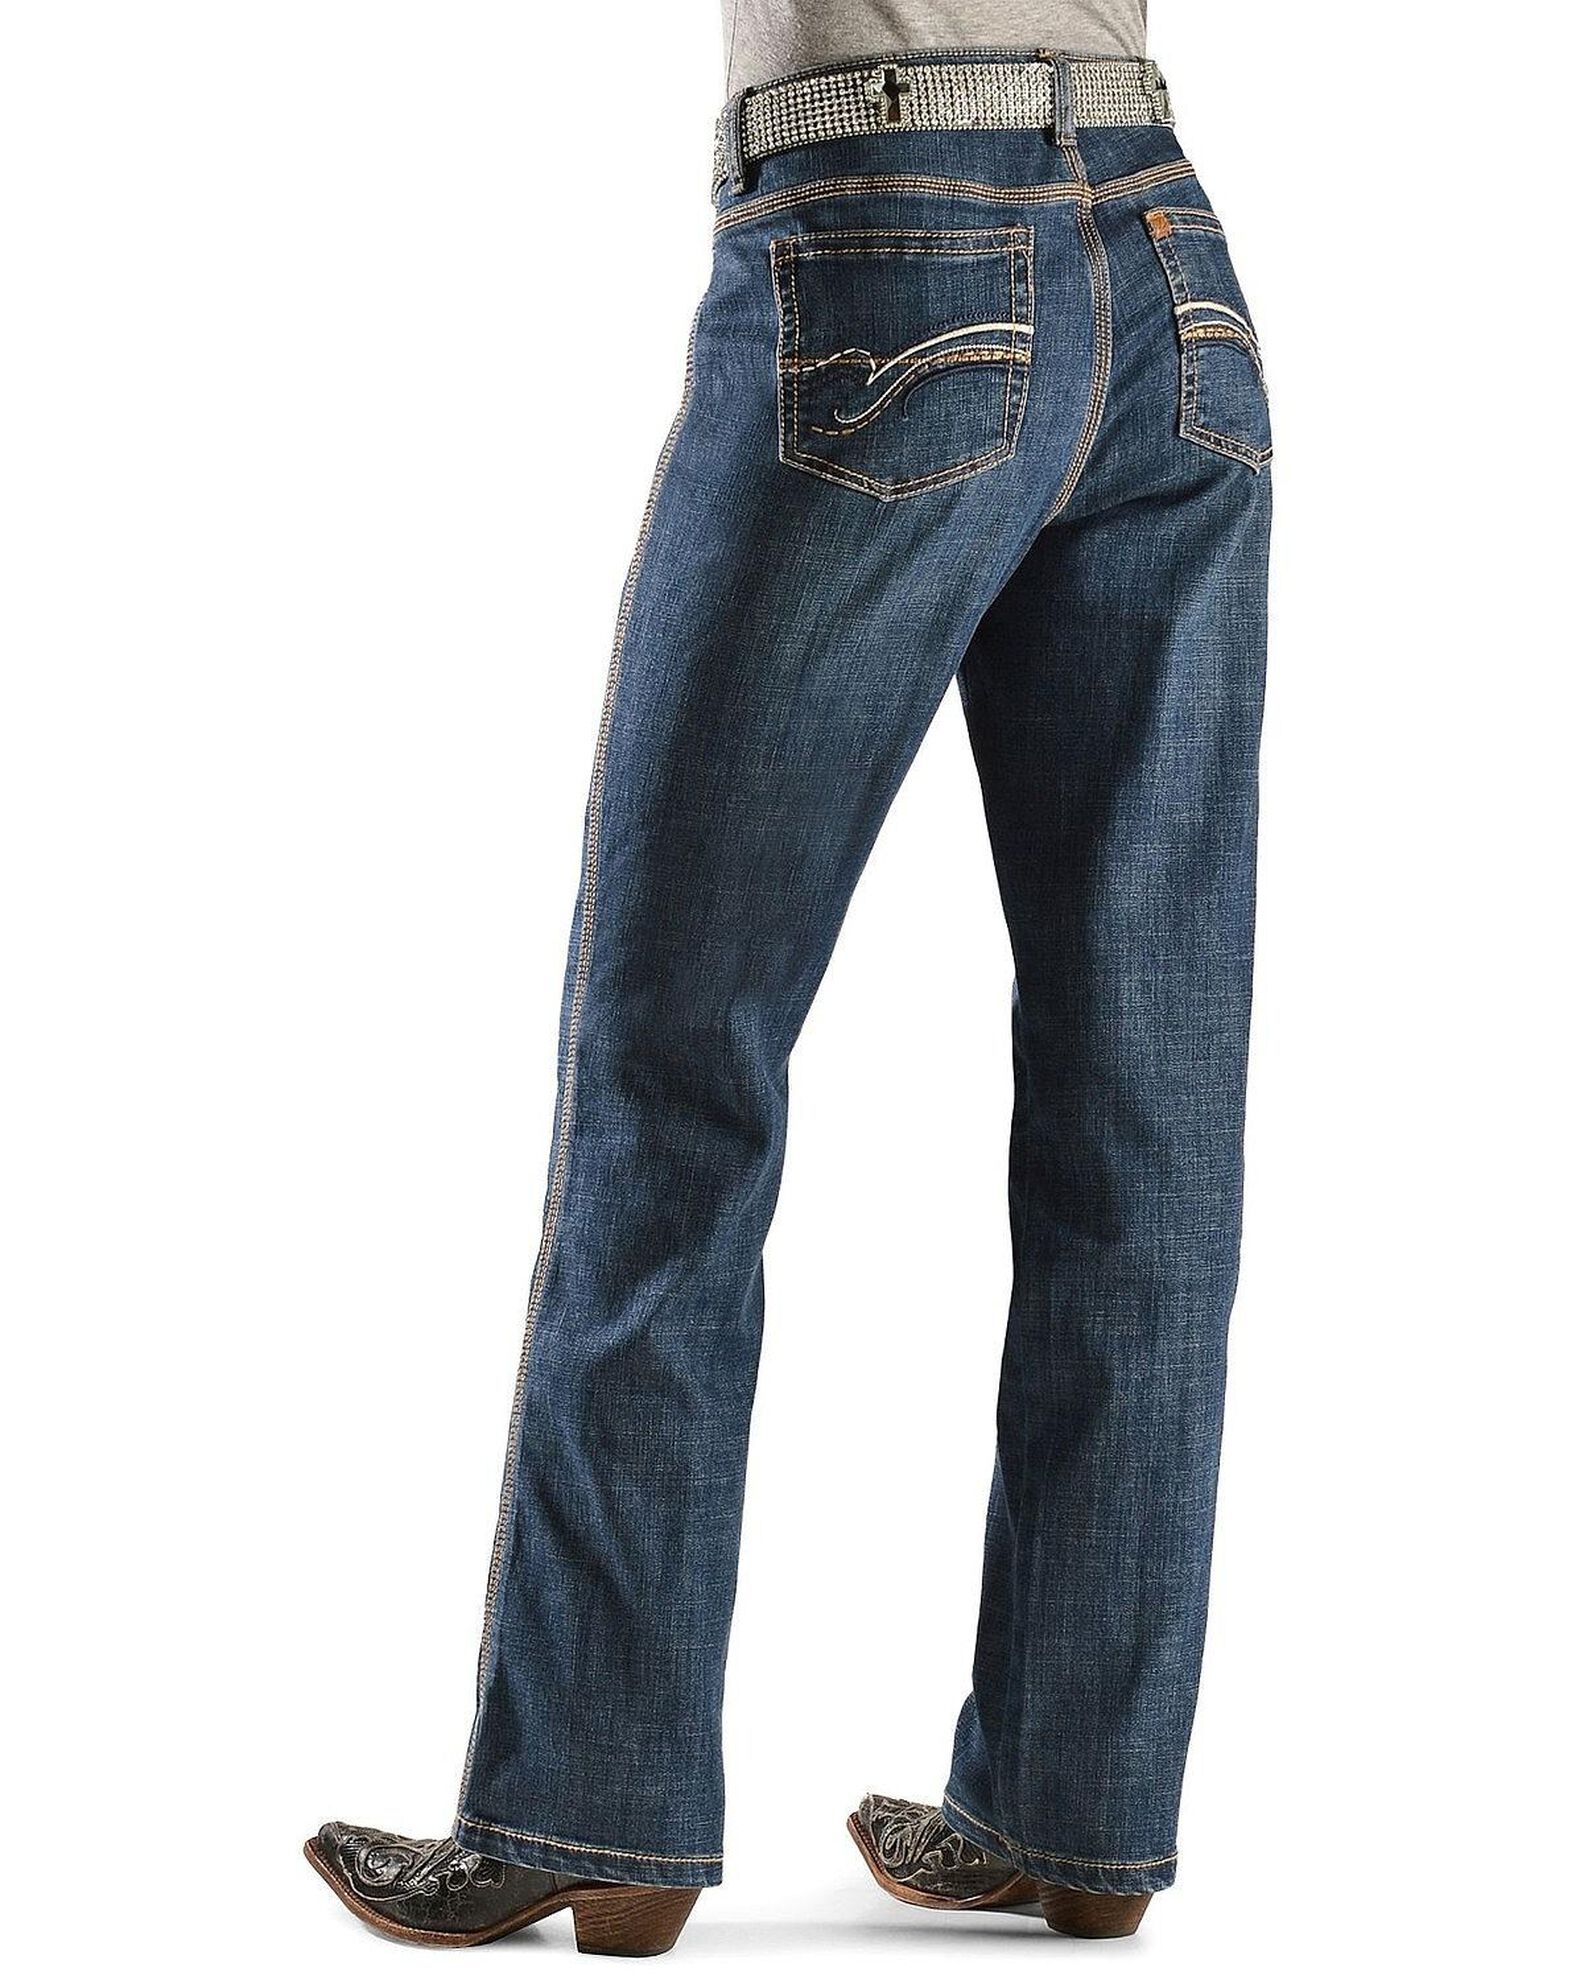 Aura by Wrangler Women's Slimming Stretch Jeans | Boot Barn